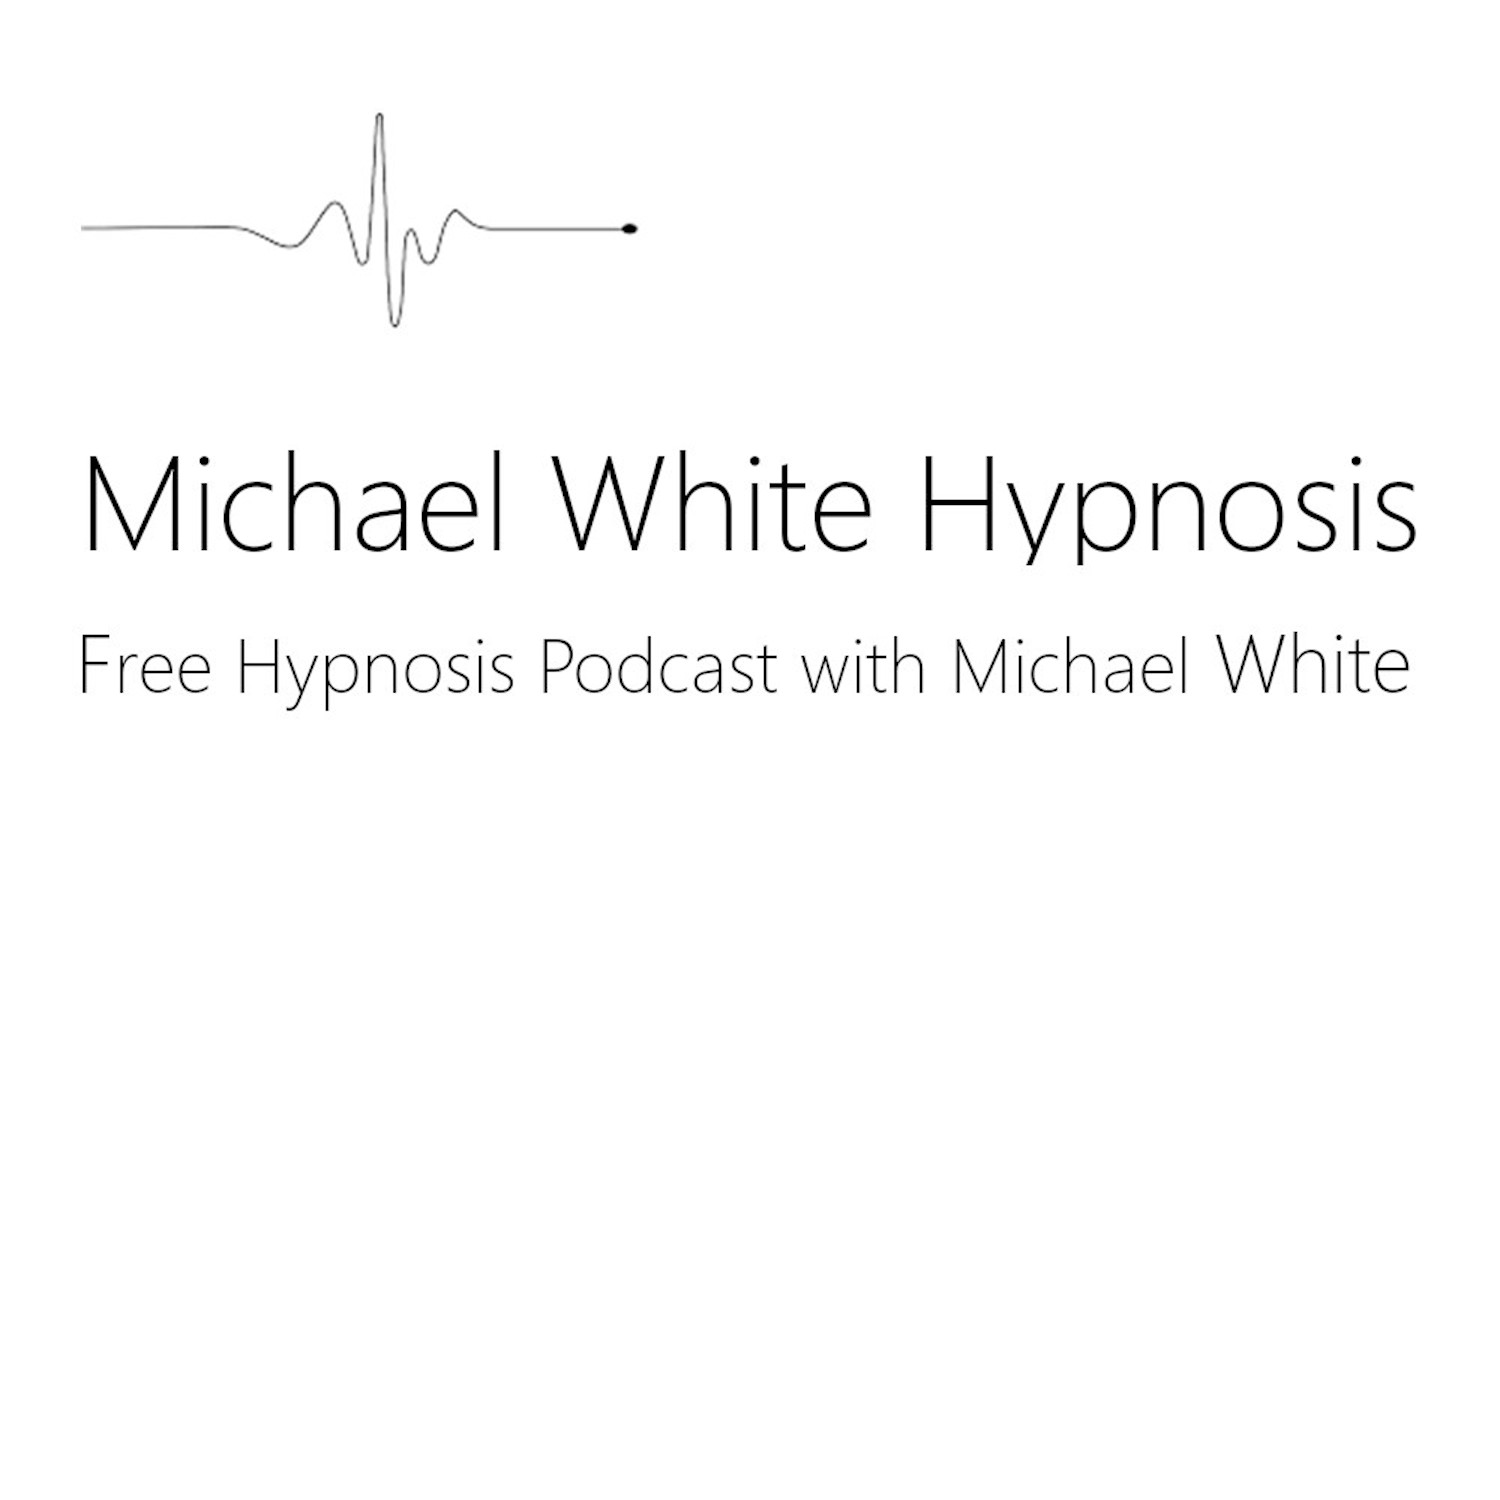 Free Hypnosis Podcast with Michael White